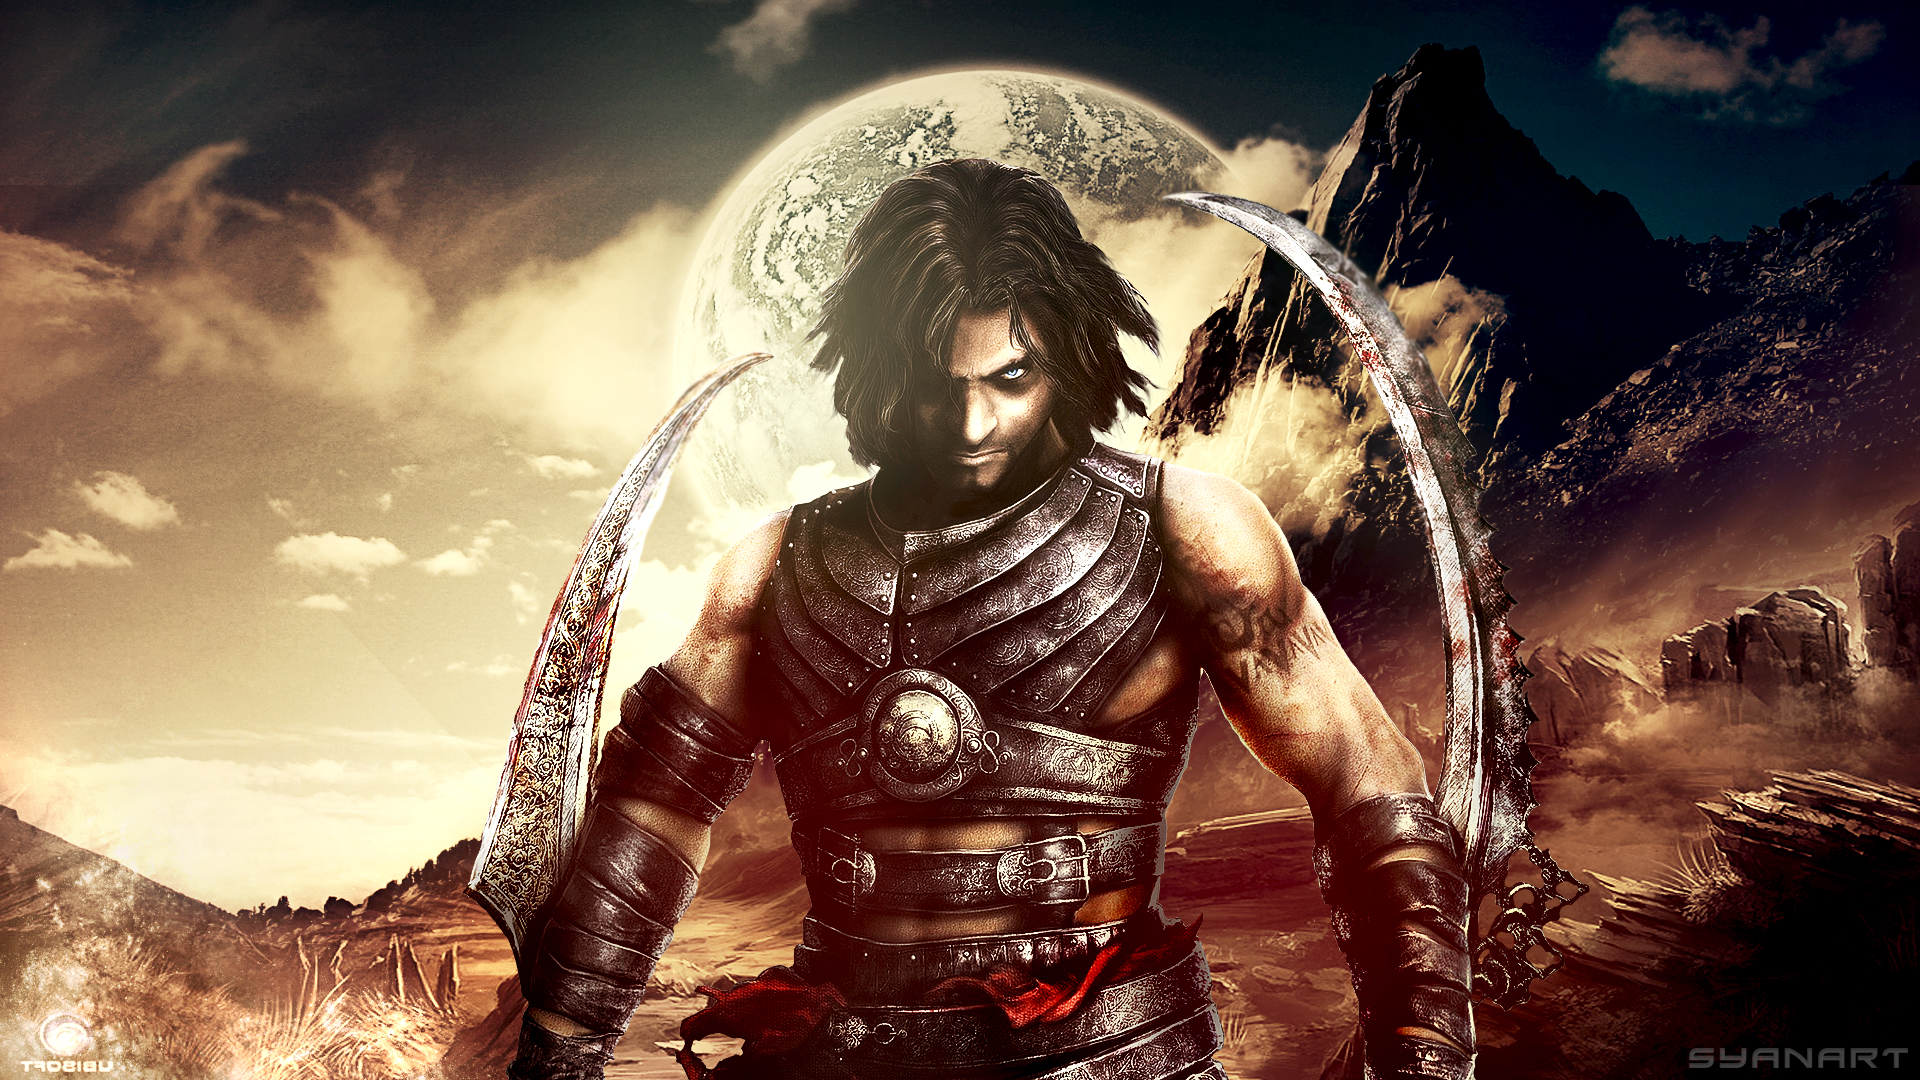 HD desktop wallpaper: Prince Of Persia, Video Game, Prince Of Persia:  Warrior Within, The Prince (Sands Of Time) download free picture #500888